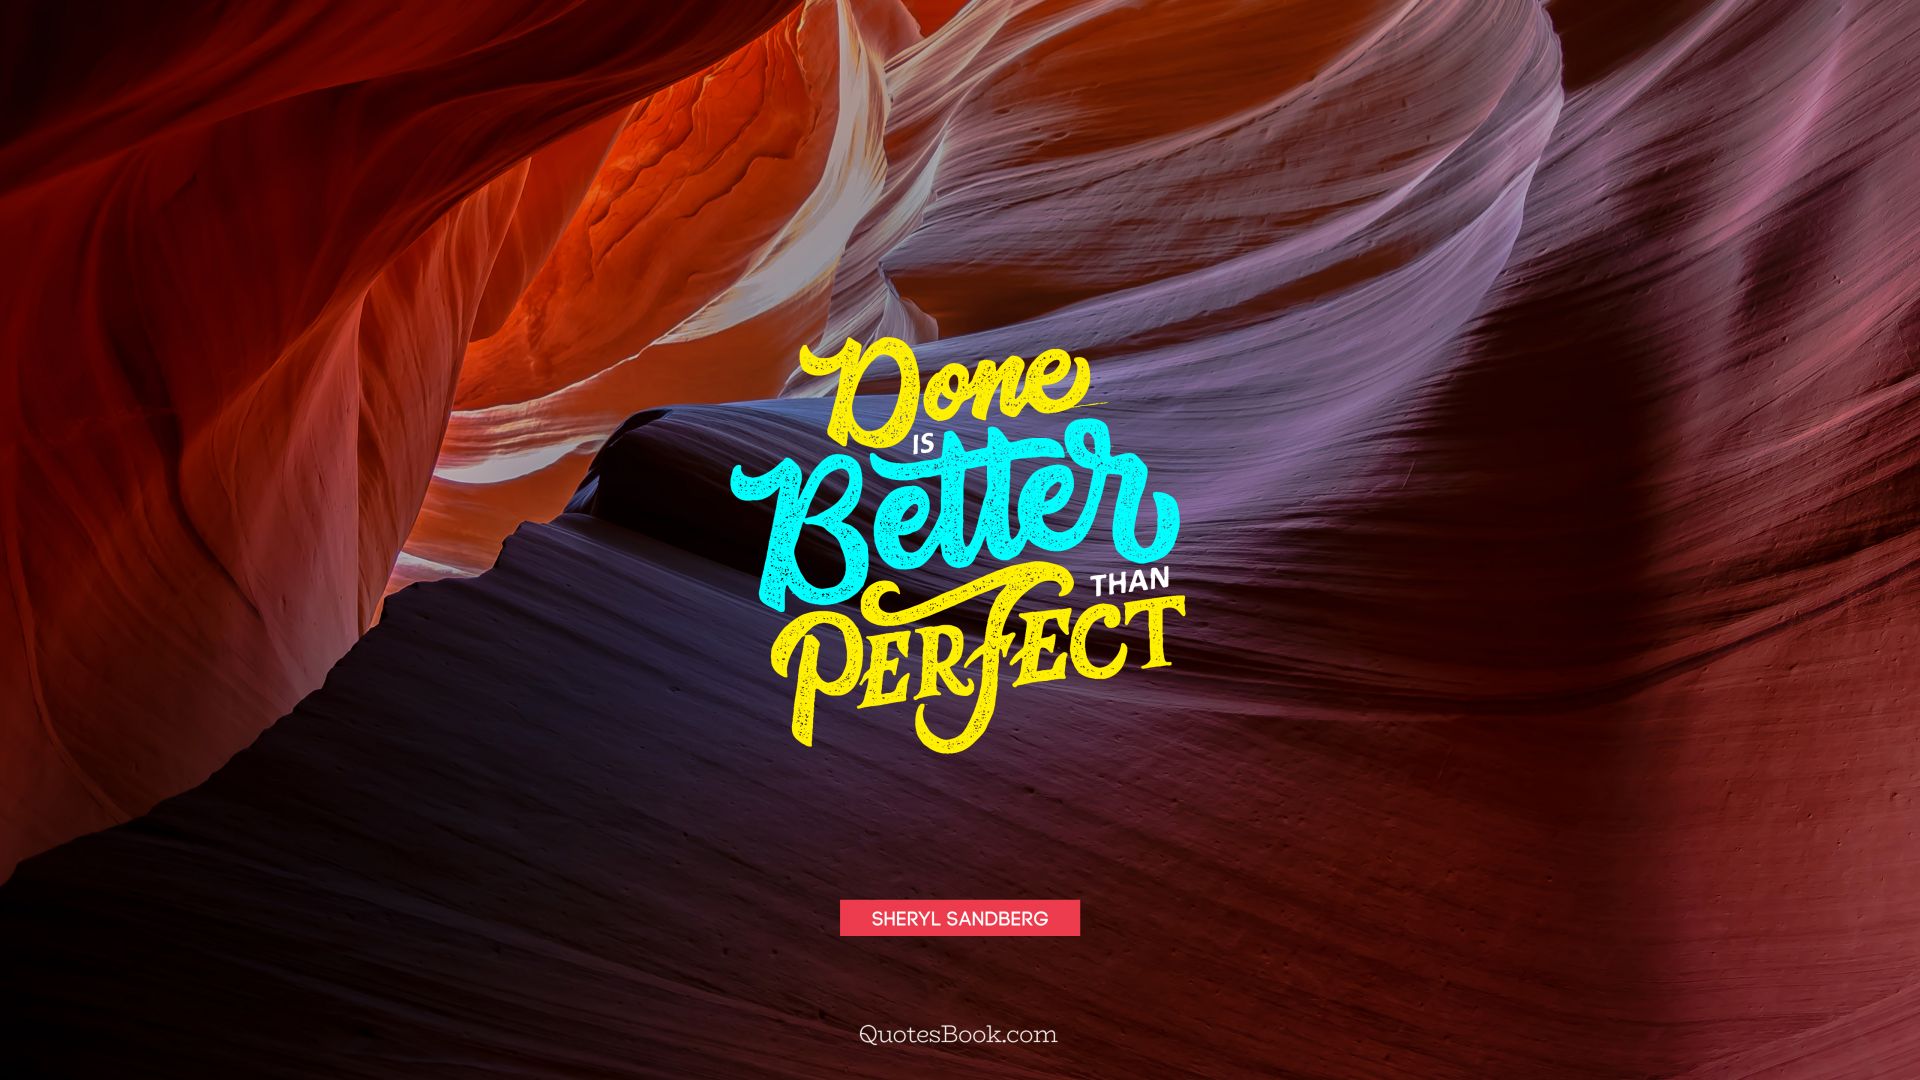 Done is better than perfect. - Quote by Sheryl Sandberg